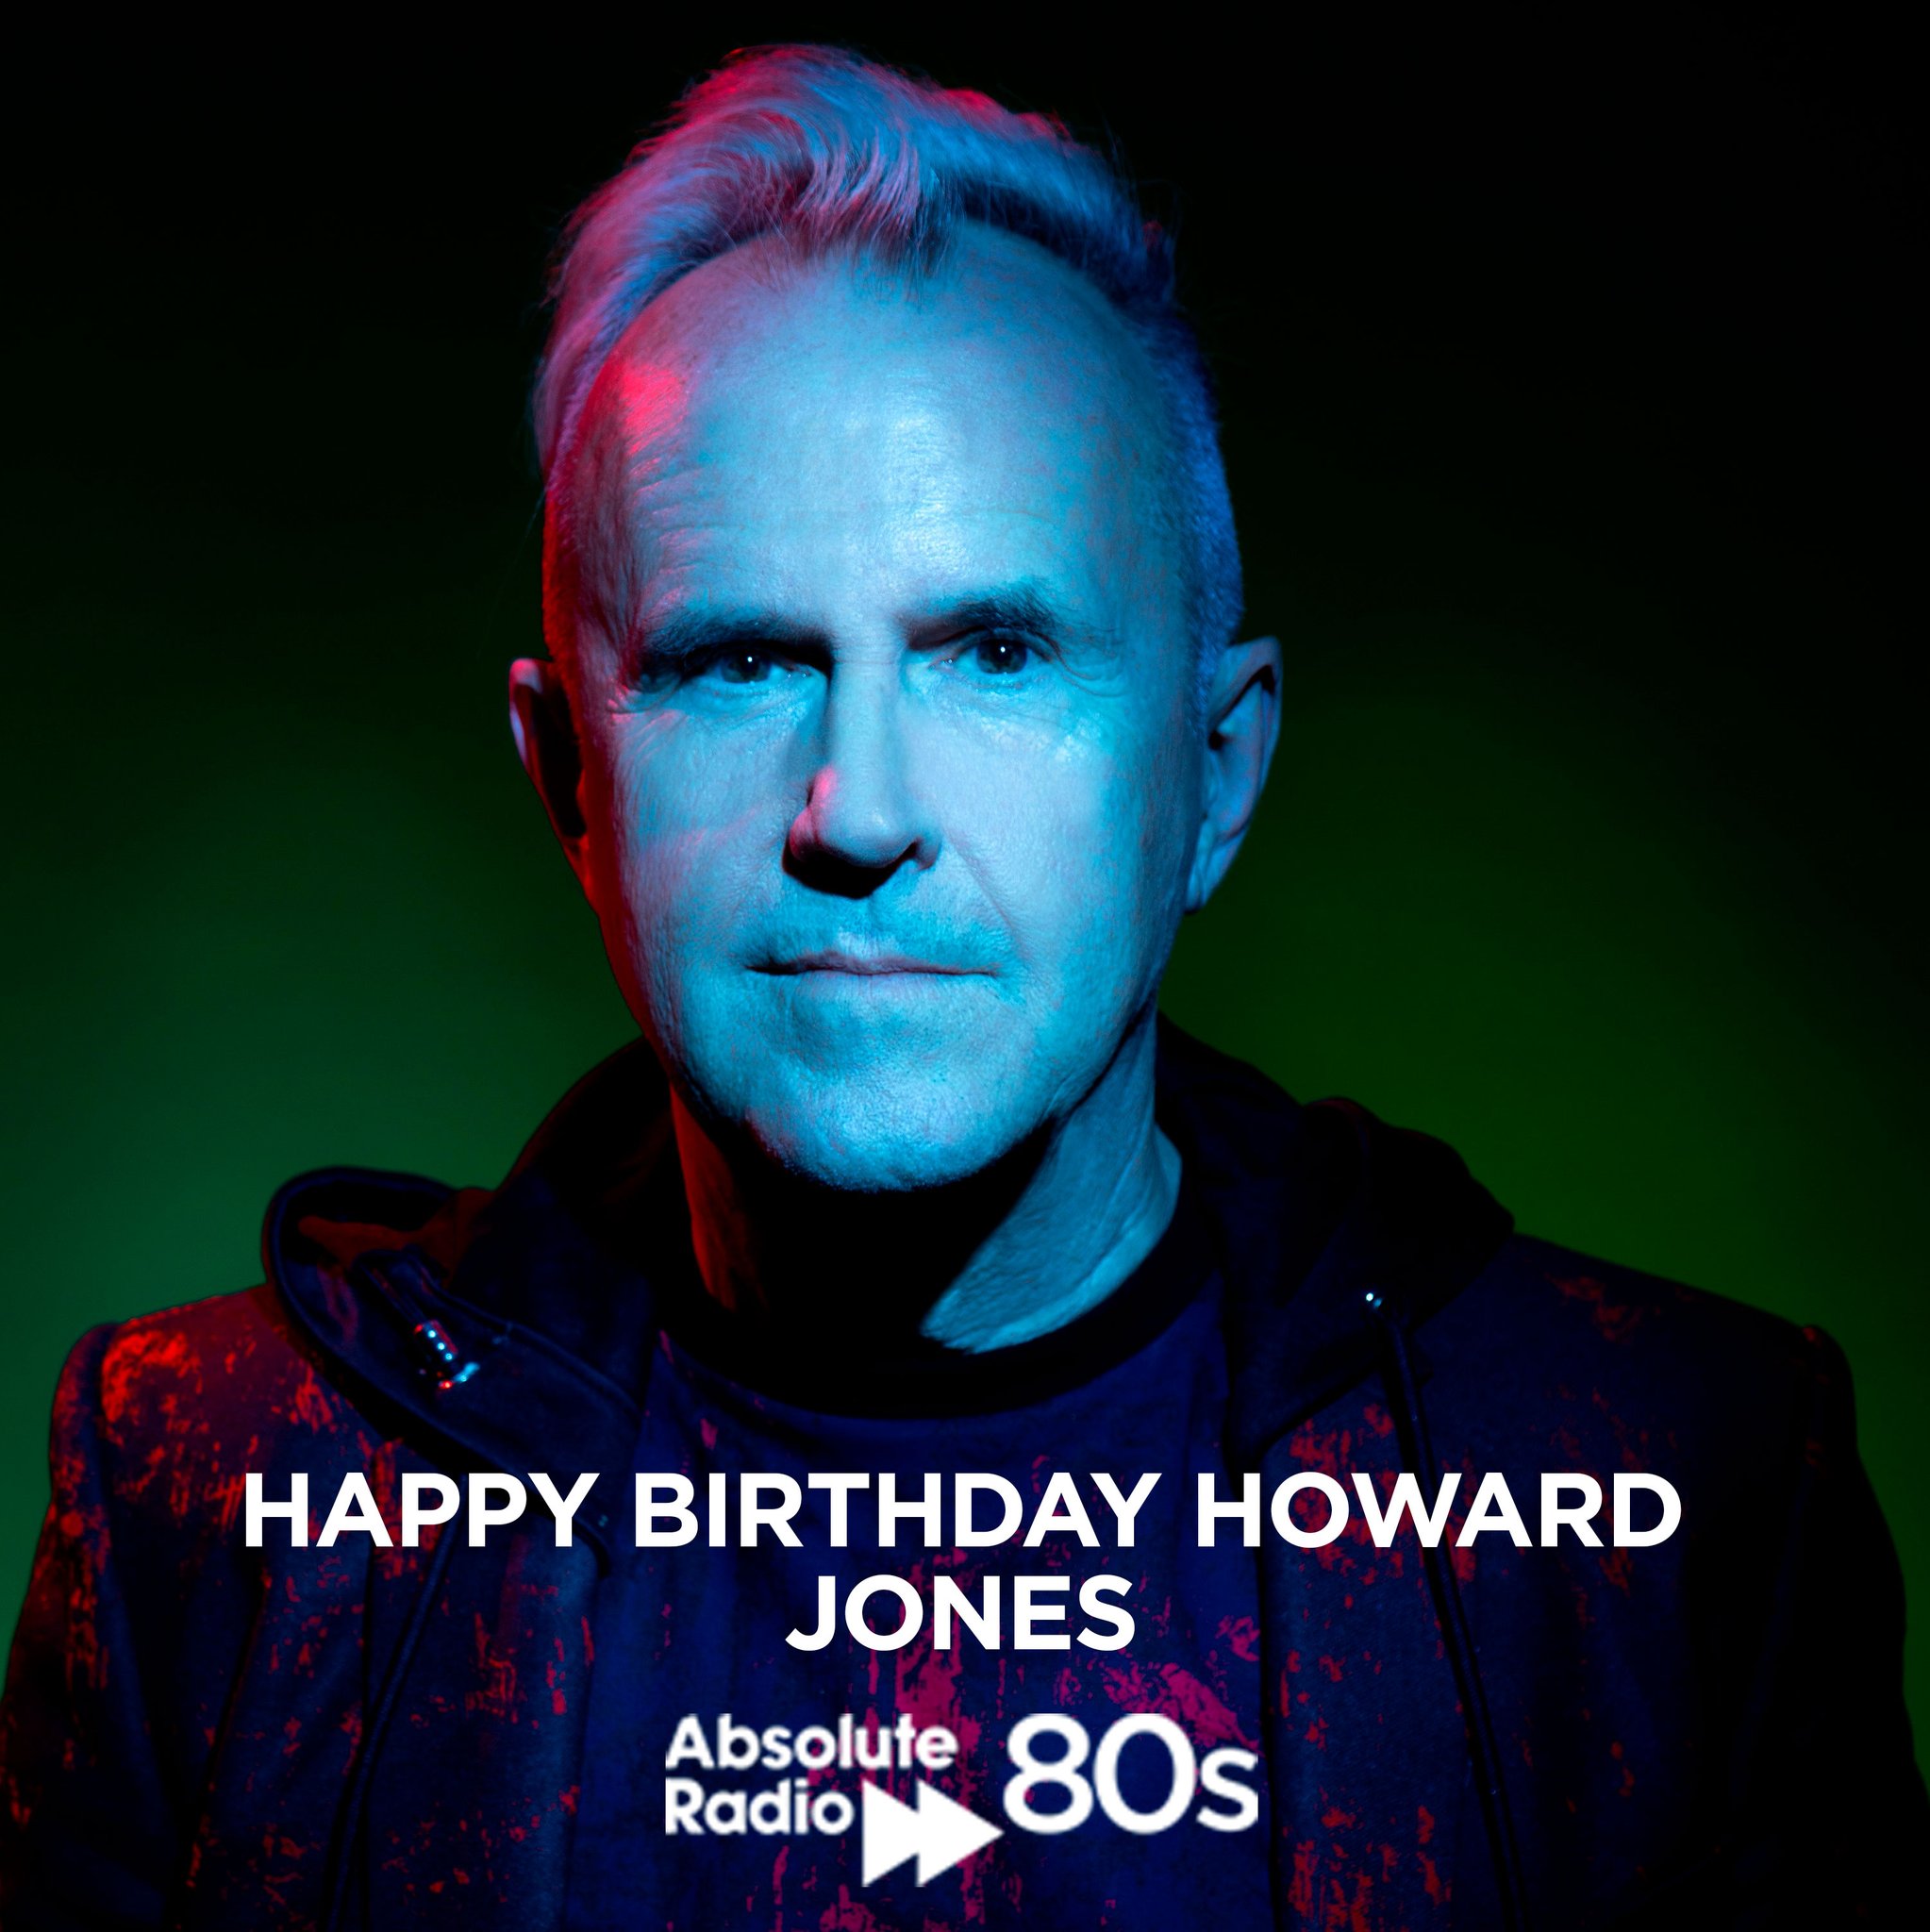 A very Happy Birthday to Mr Howard Jones from everyone at 